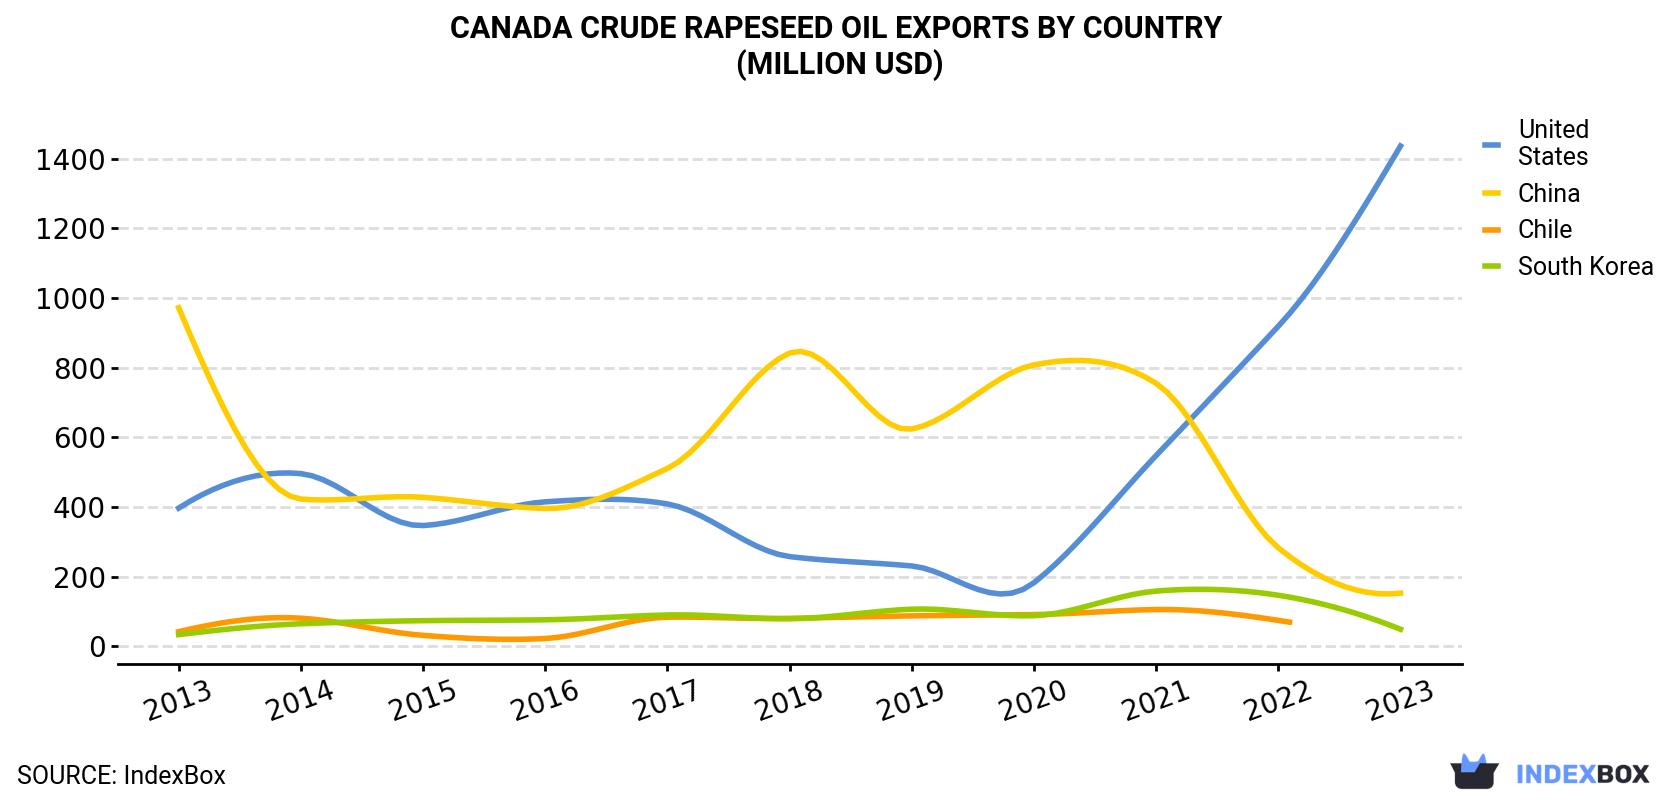 Canada Crude Rapeseed Oil Exports By Country (Million USD)